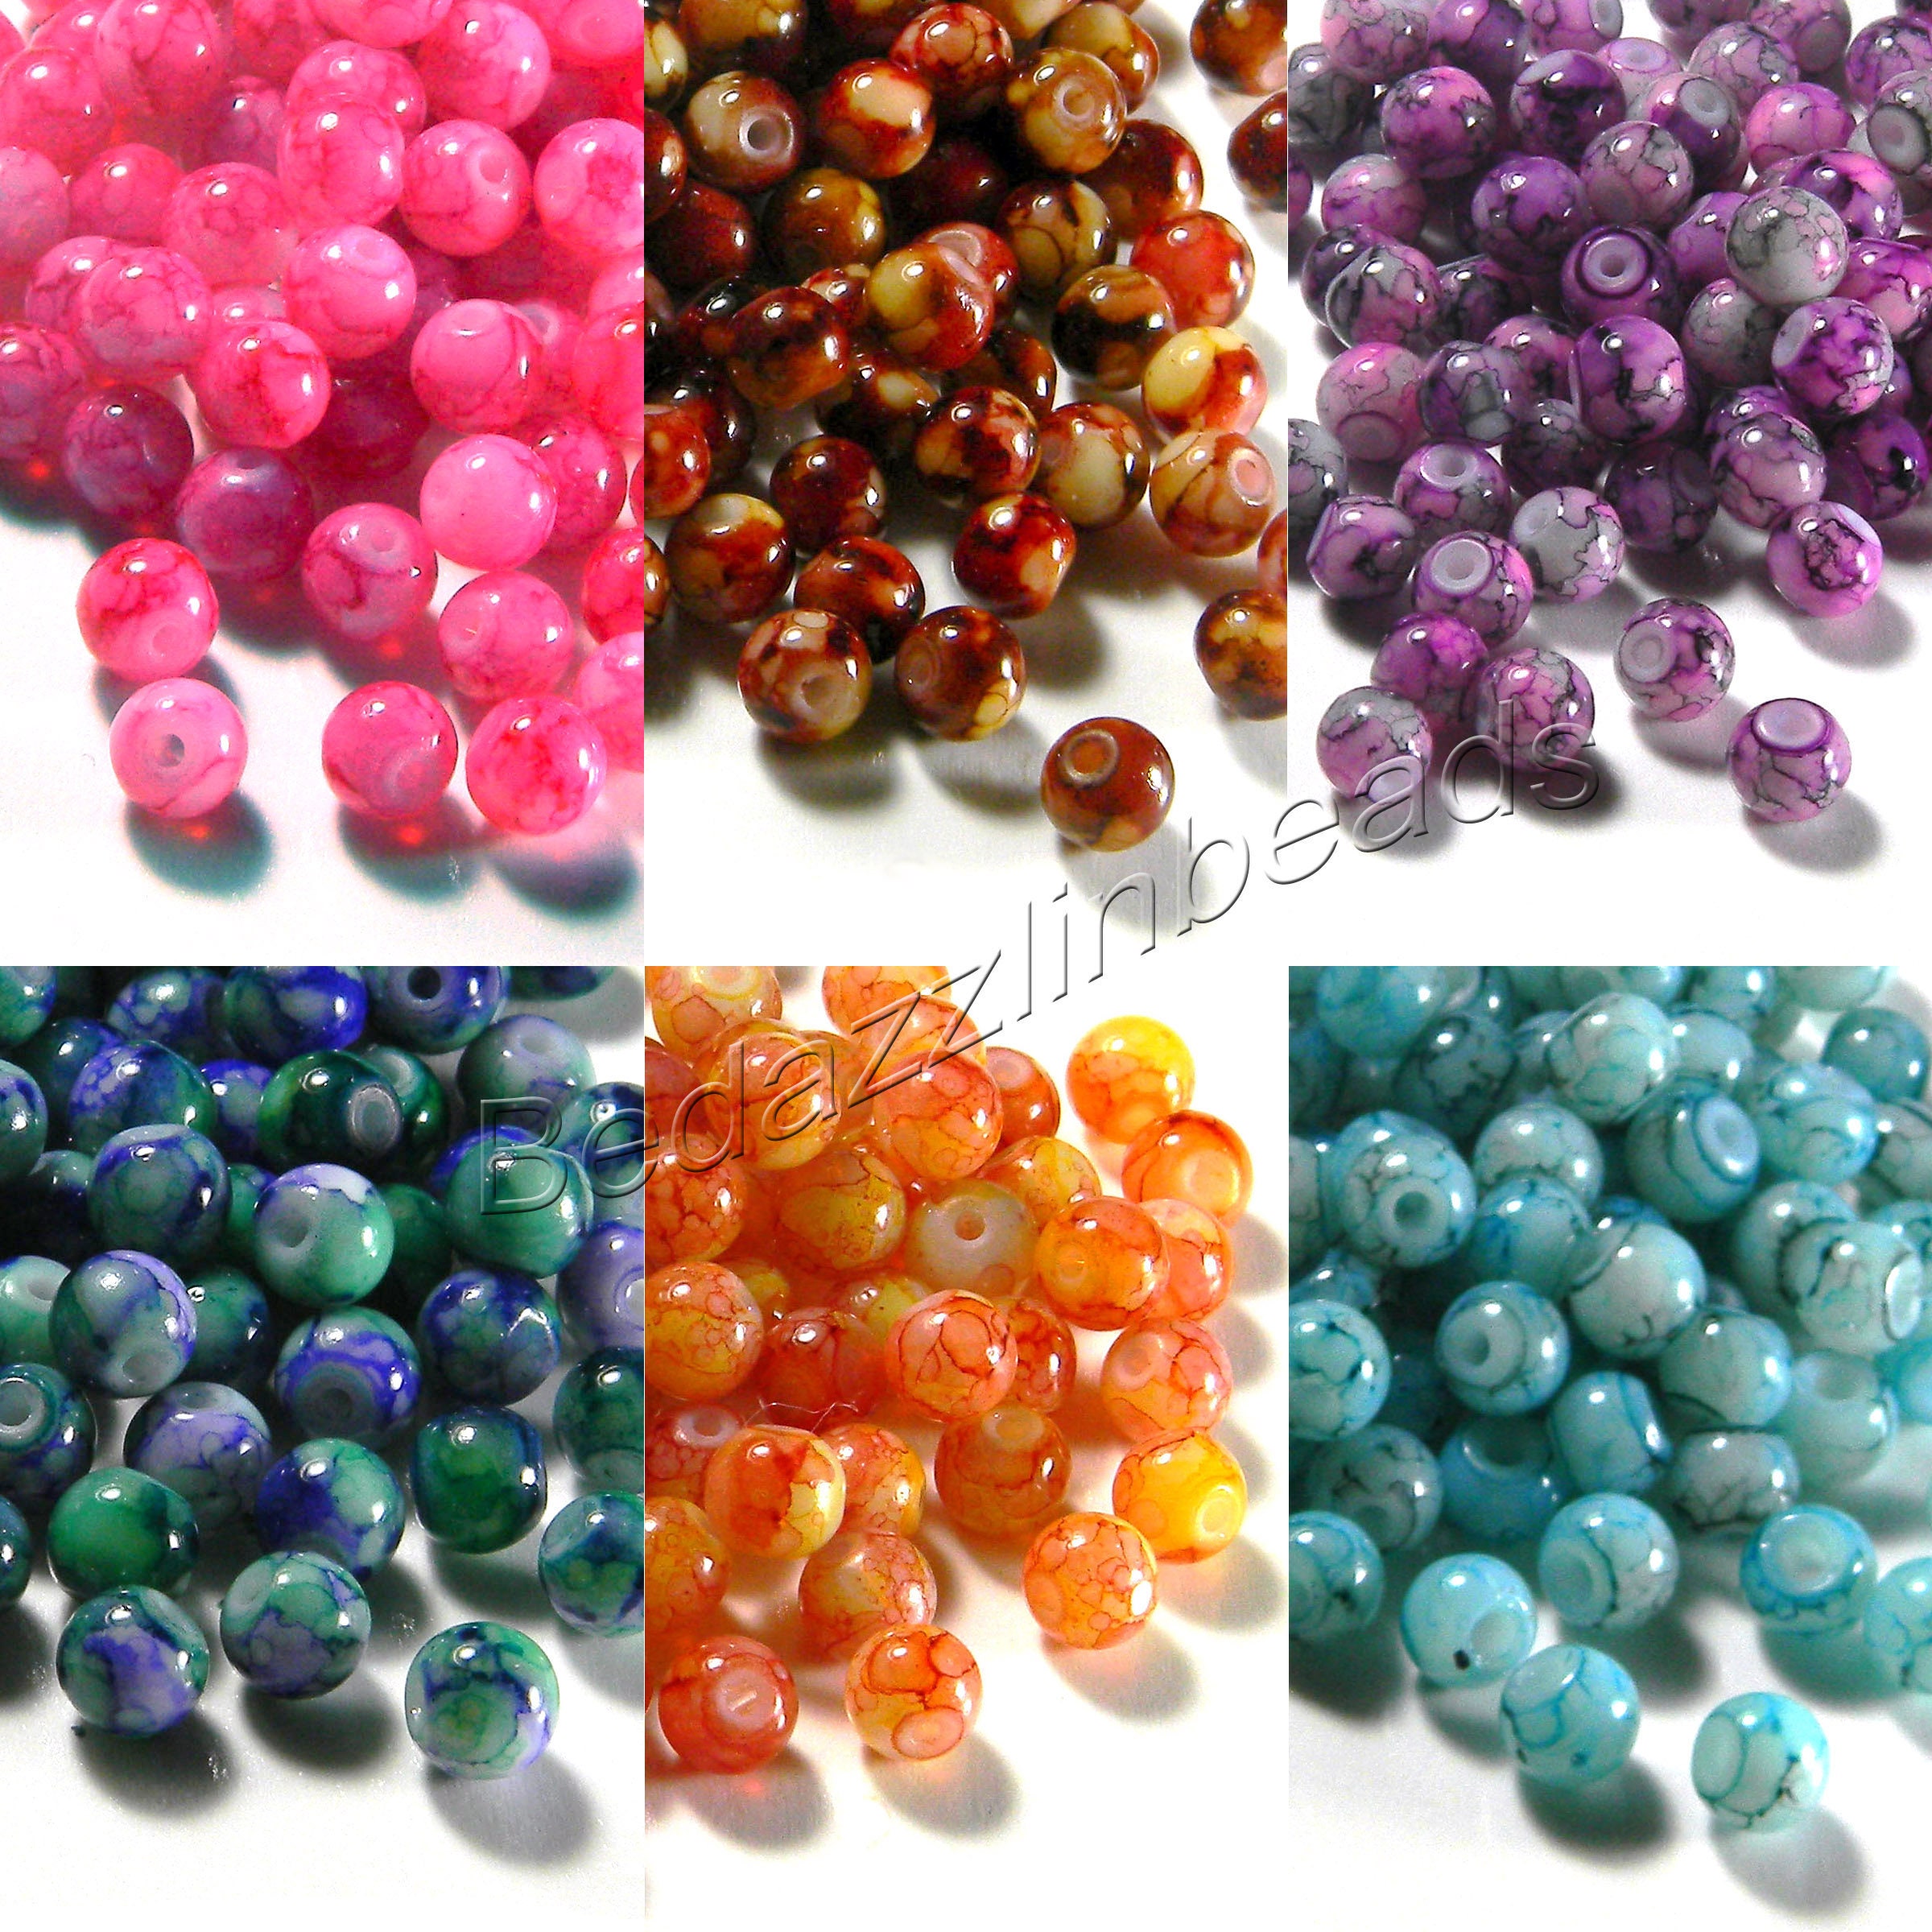 50 Marbled Tie Dye 8mm Round Loose Multicolored Glass Beads for Jewelry  Making 